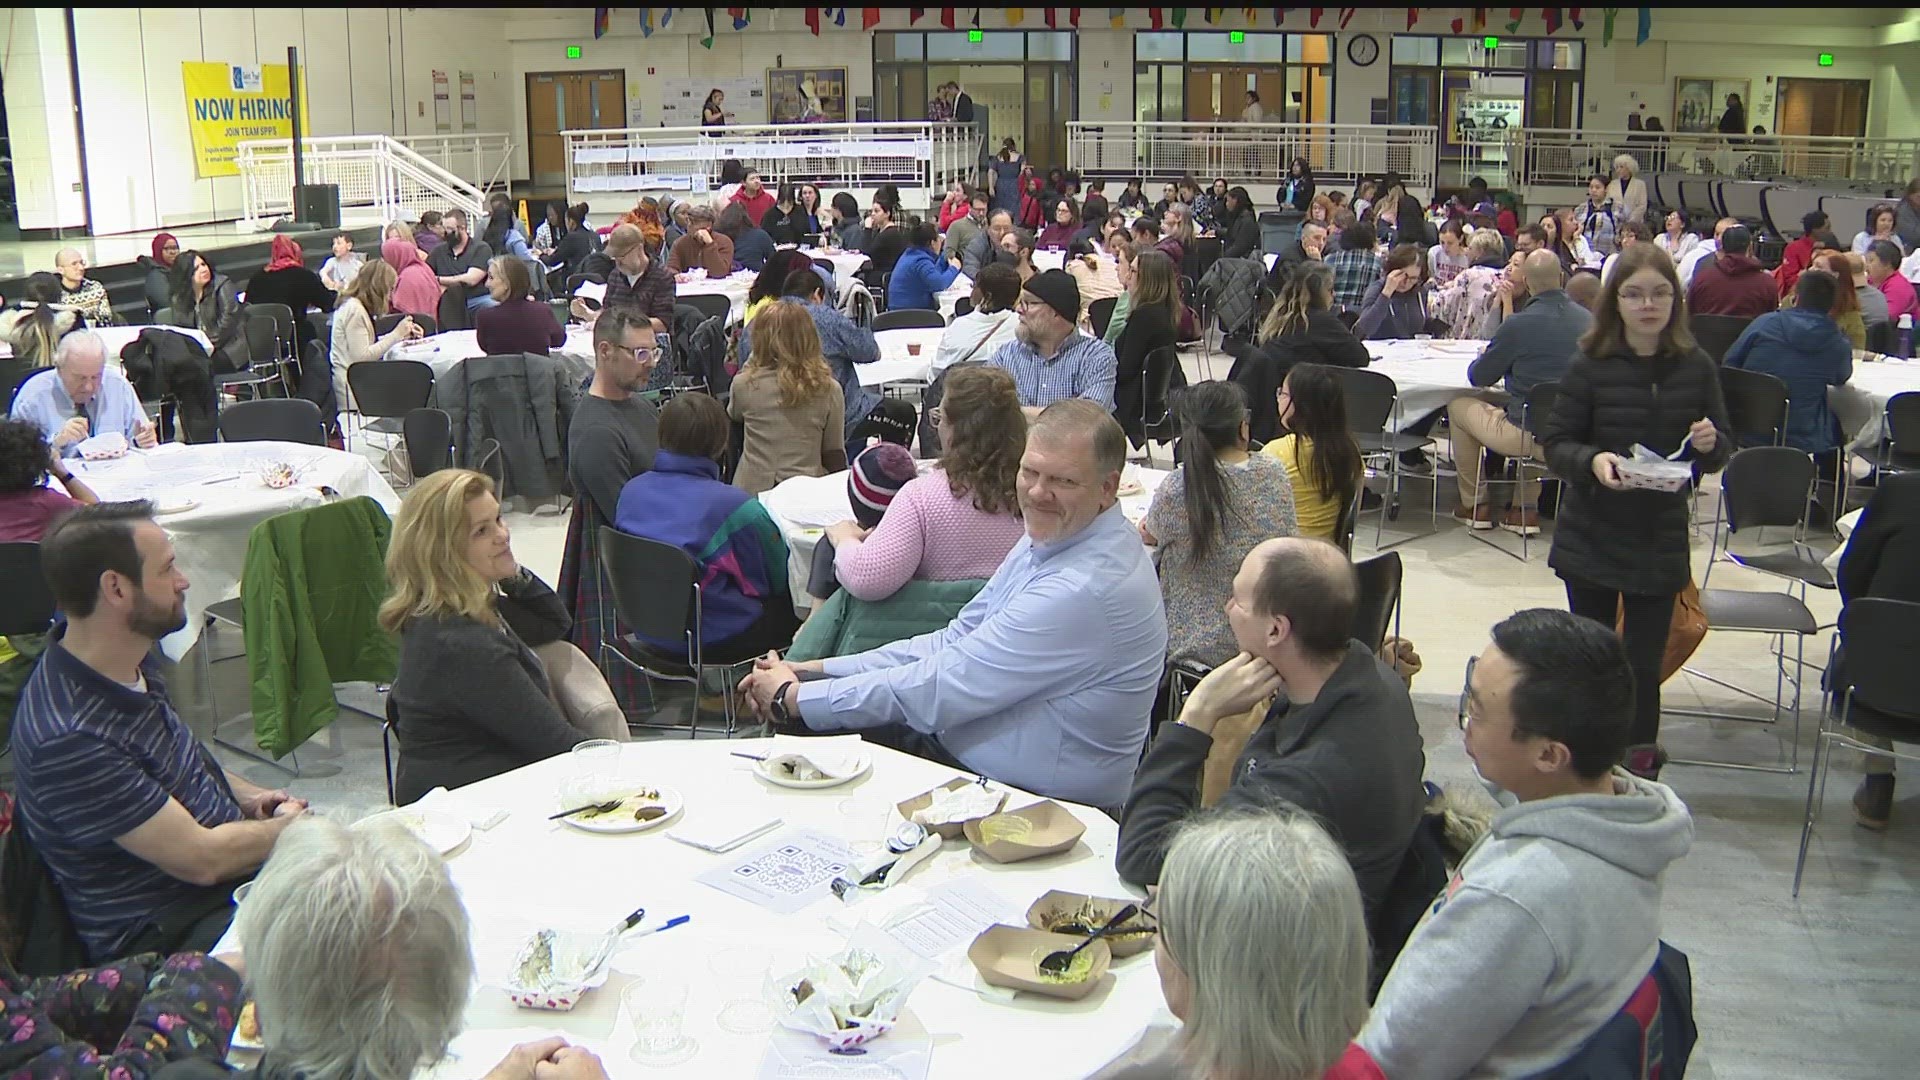 Hundreds of people attended a community talking session and dinner in St. Paul Thursday to discuss school safety in the wake of the Nashville school shooting Monday.